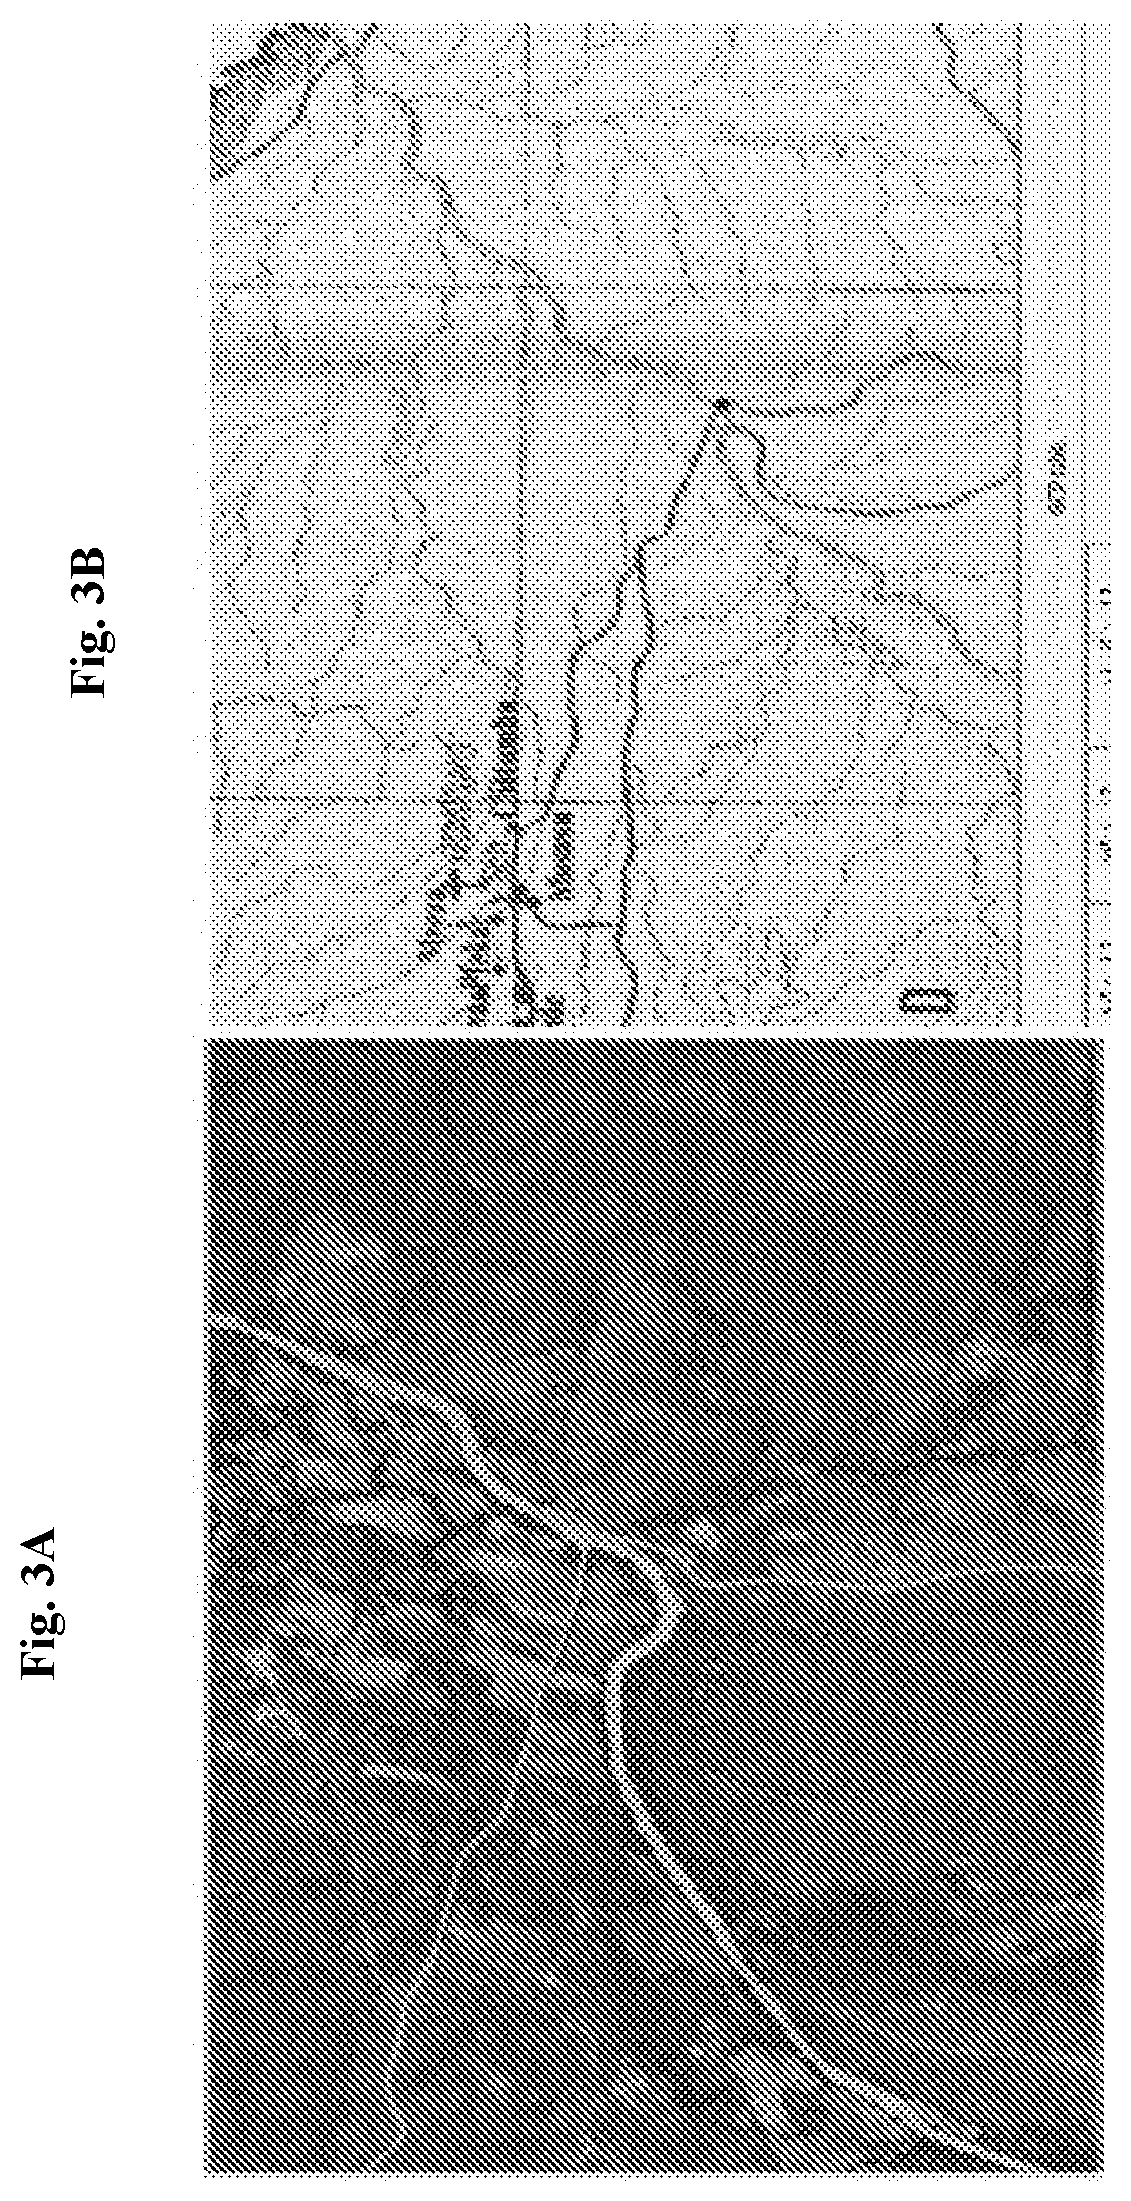 System and method for identifying and assessing topographical features using satellite data